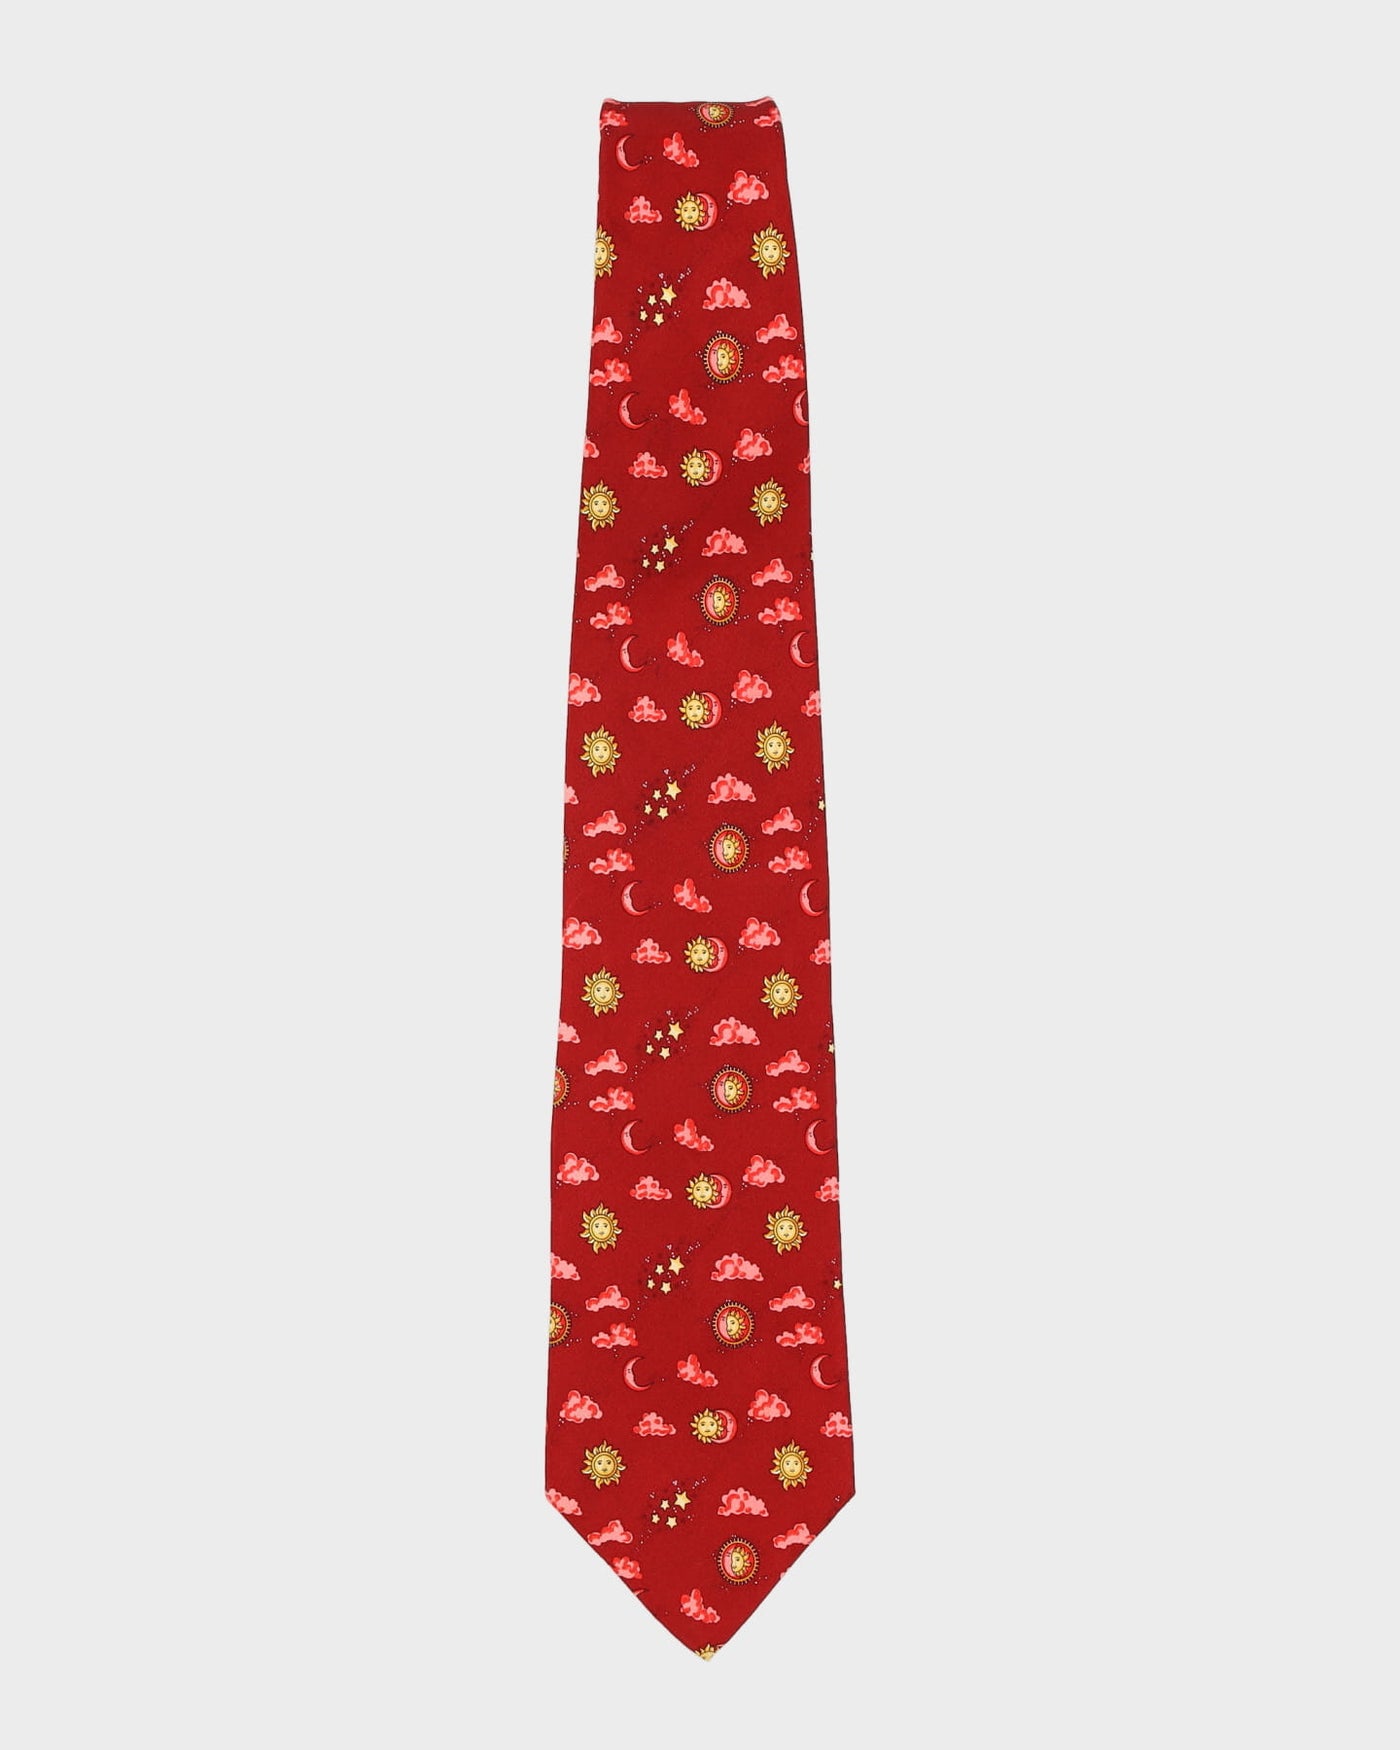 Vintage 90s Christian Dior Red Sun & Moon Patterned Tie